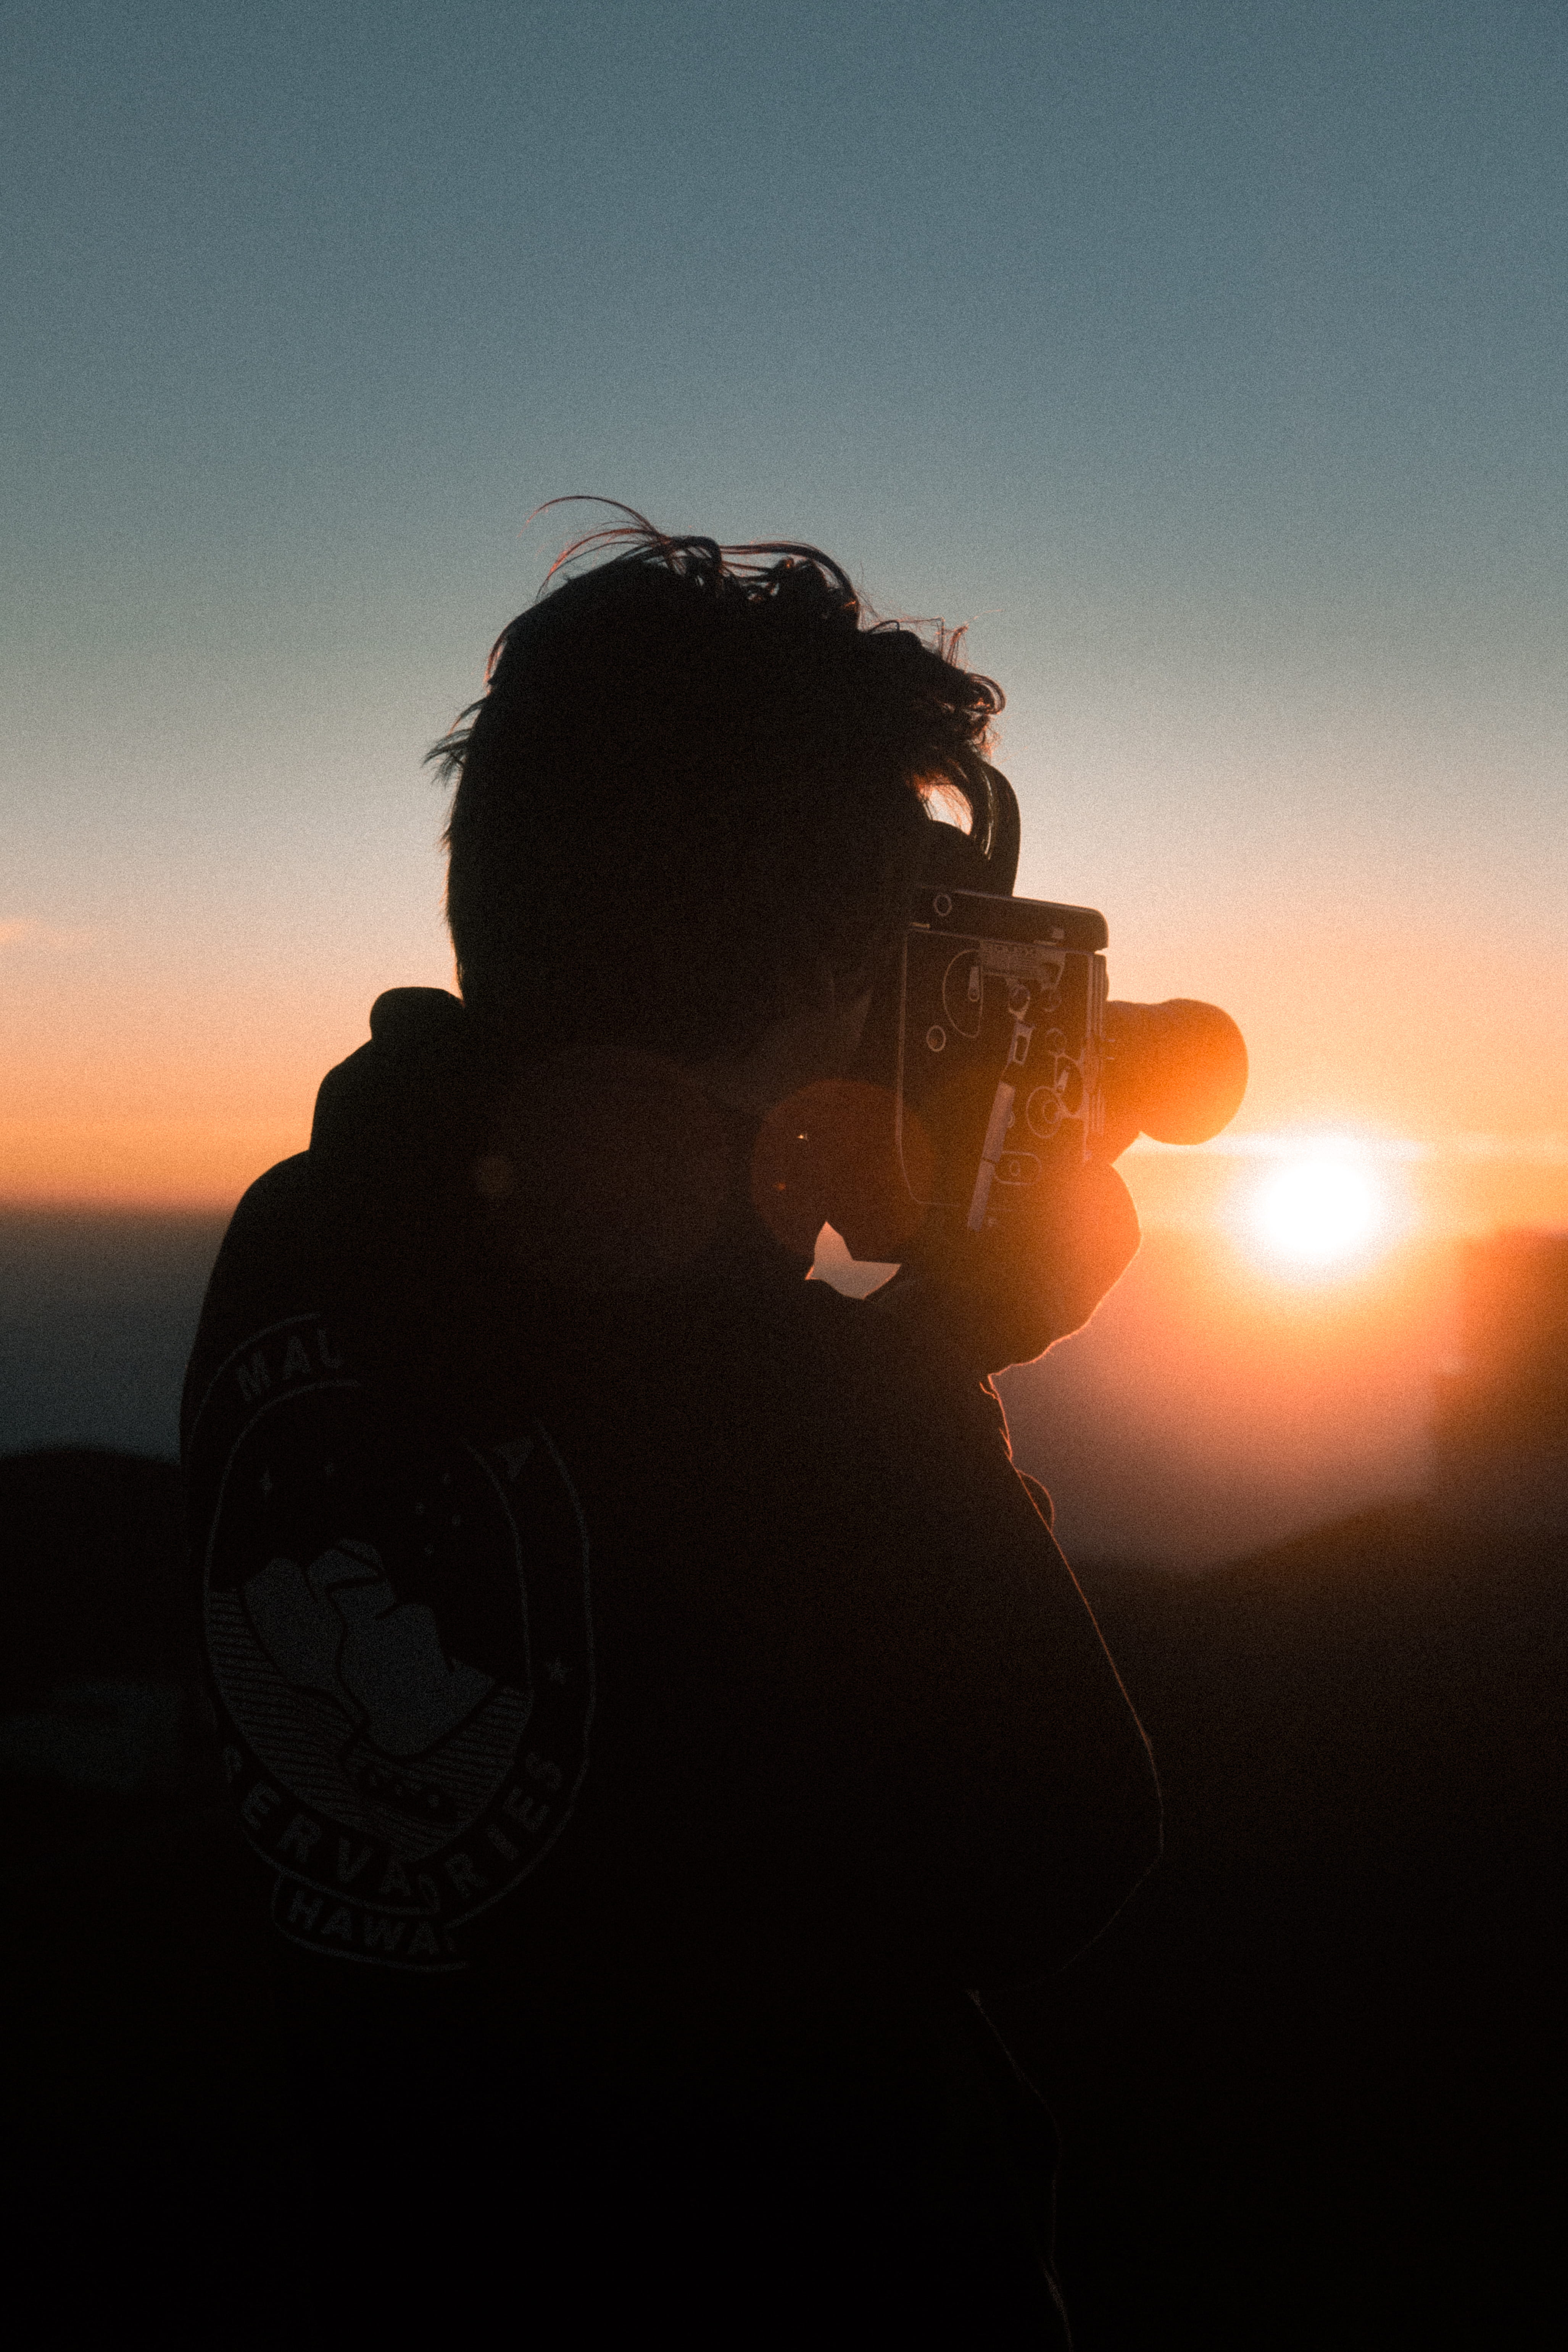 man holding classic camera during golden hour, sun, person, nature